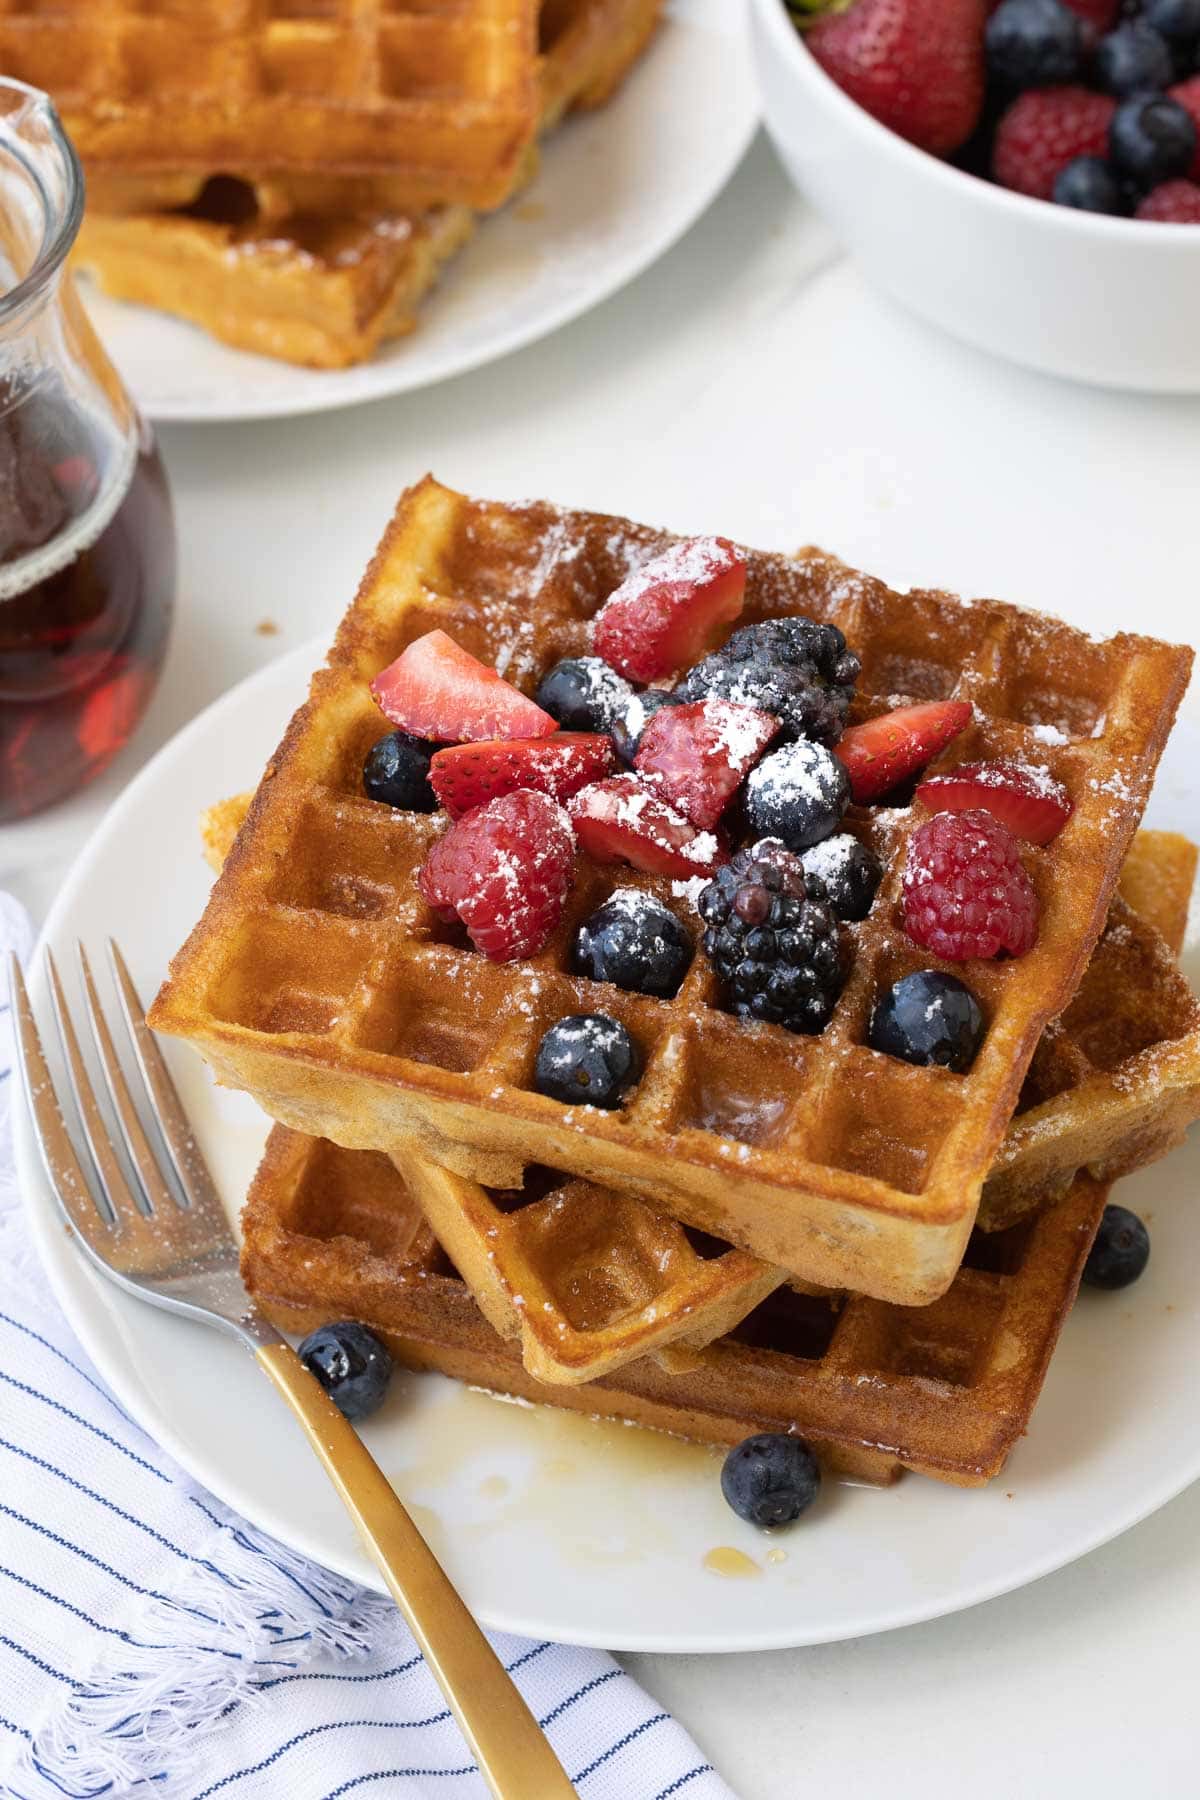 A stack of golden crispy gluten-free waffles with berries, maple and powdered sugar.